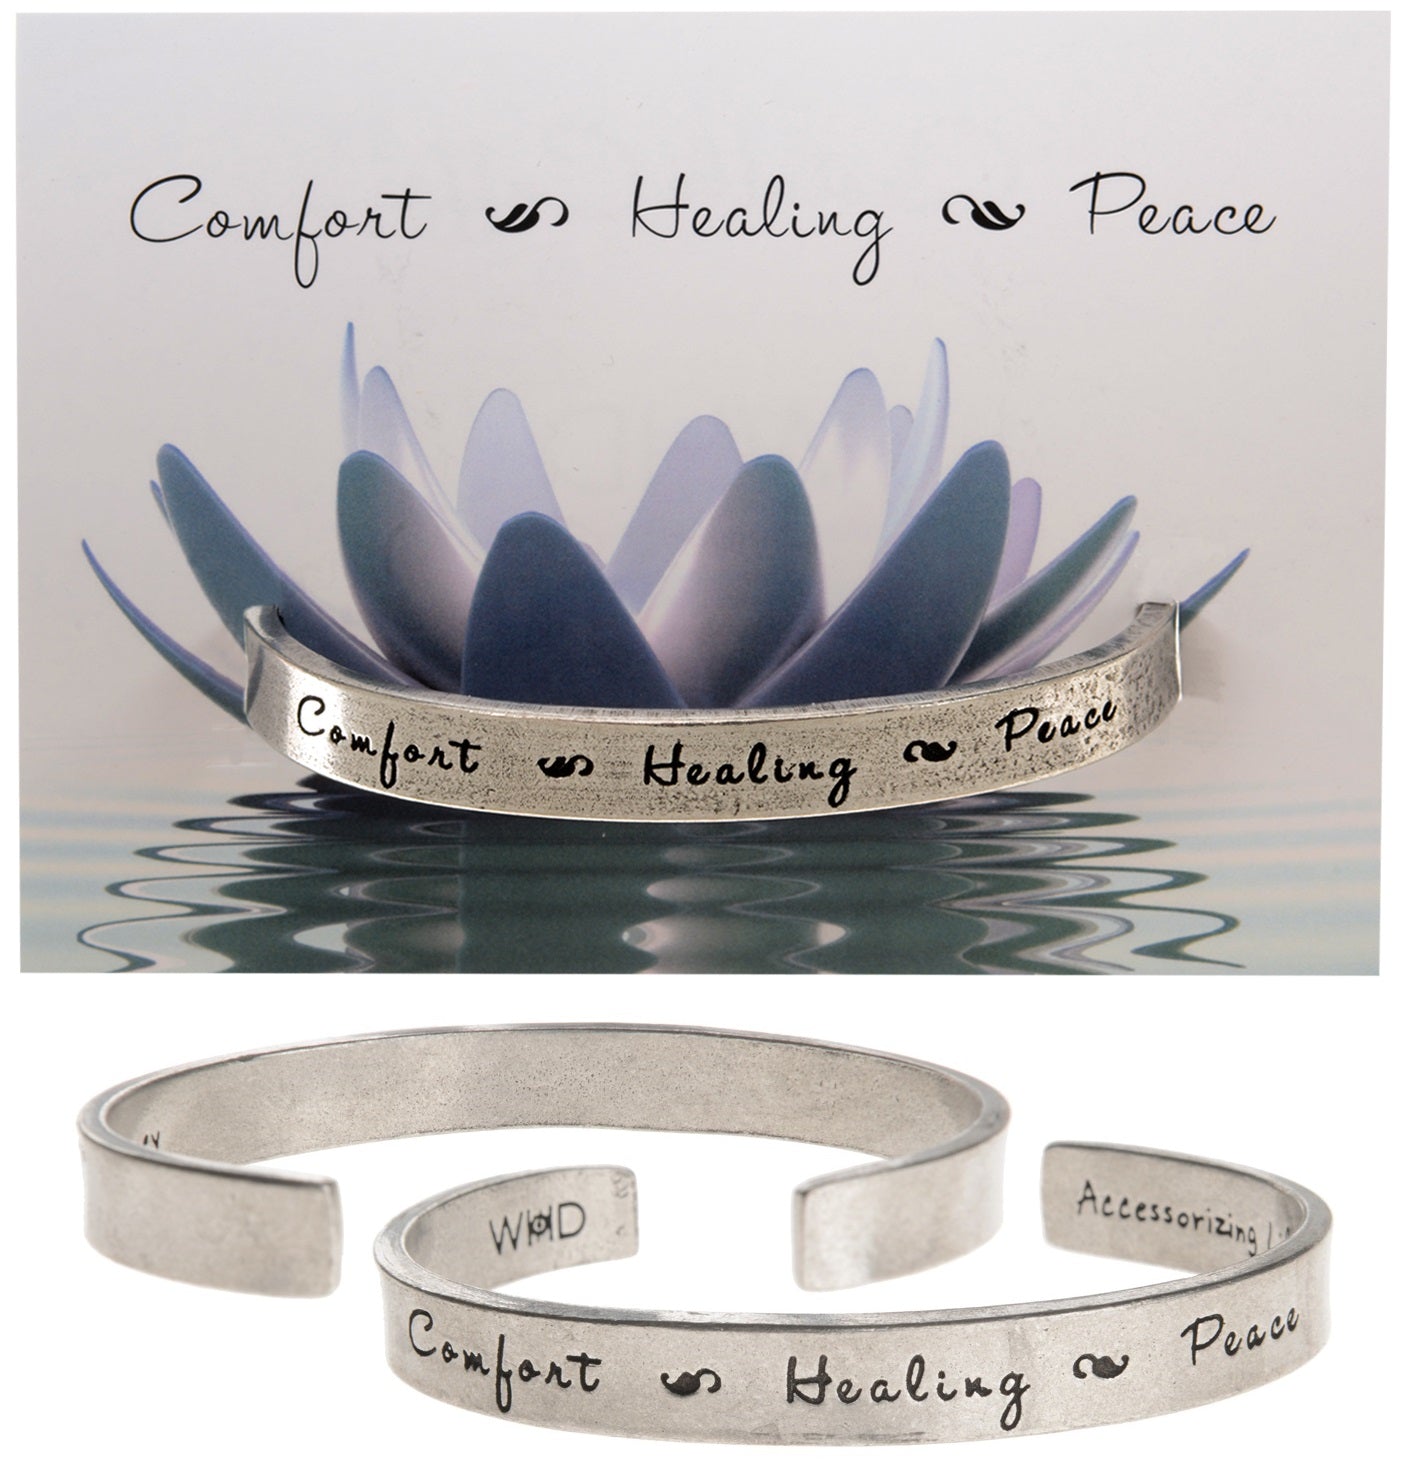 Comfort-Healing-Peace Quotable Cuff Bracelet with backer card